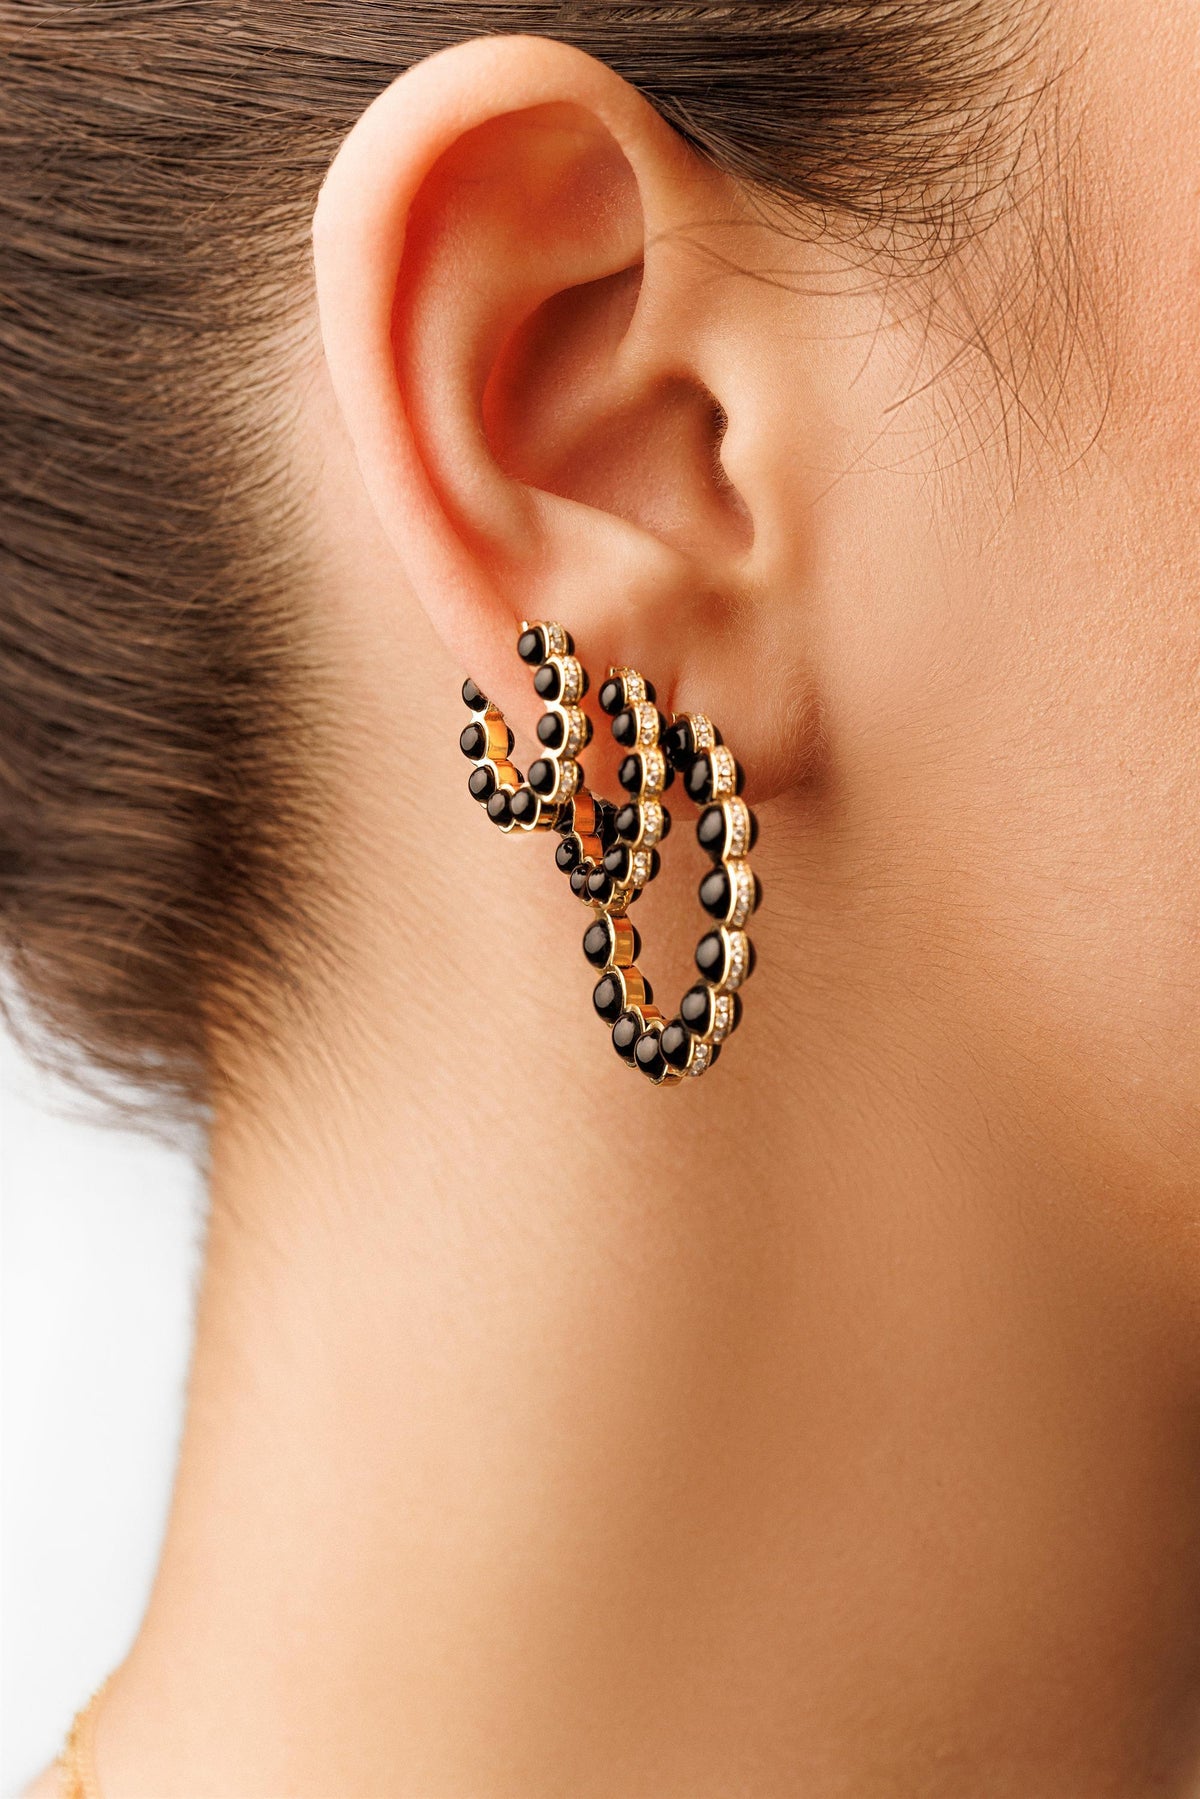 The Carbon Earrings by L'Atelier Nawbar (Size 1) - Tales of Stones